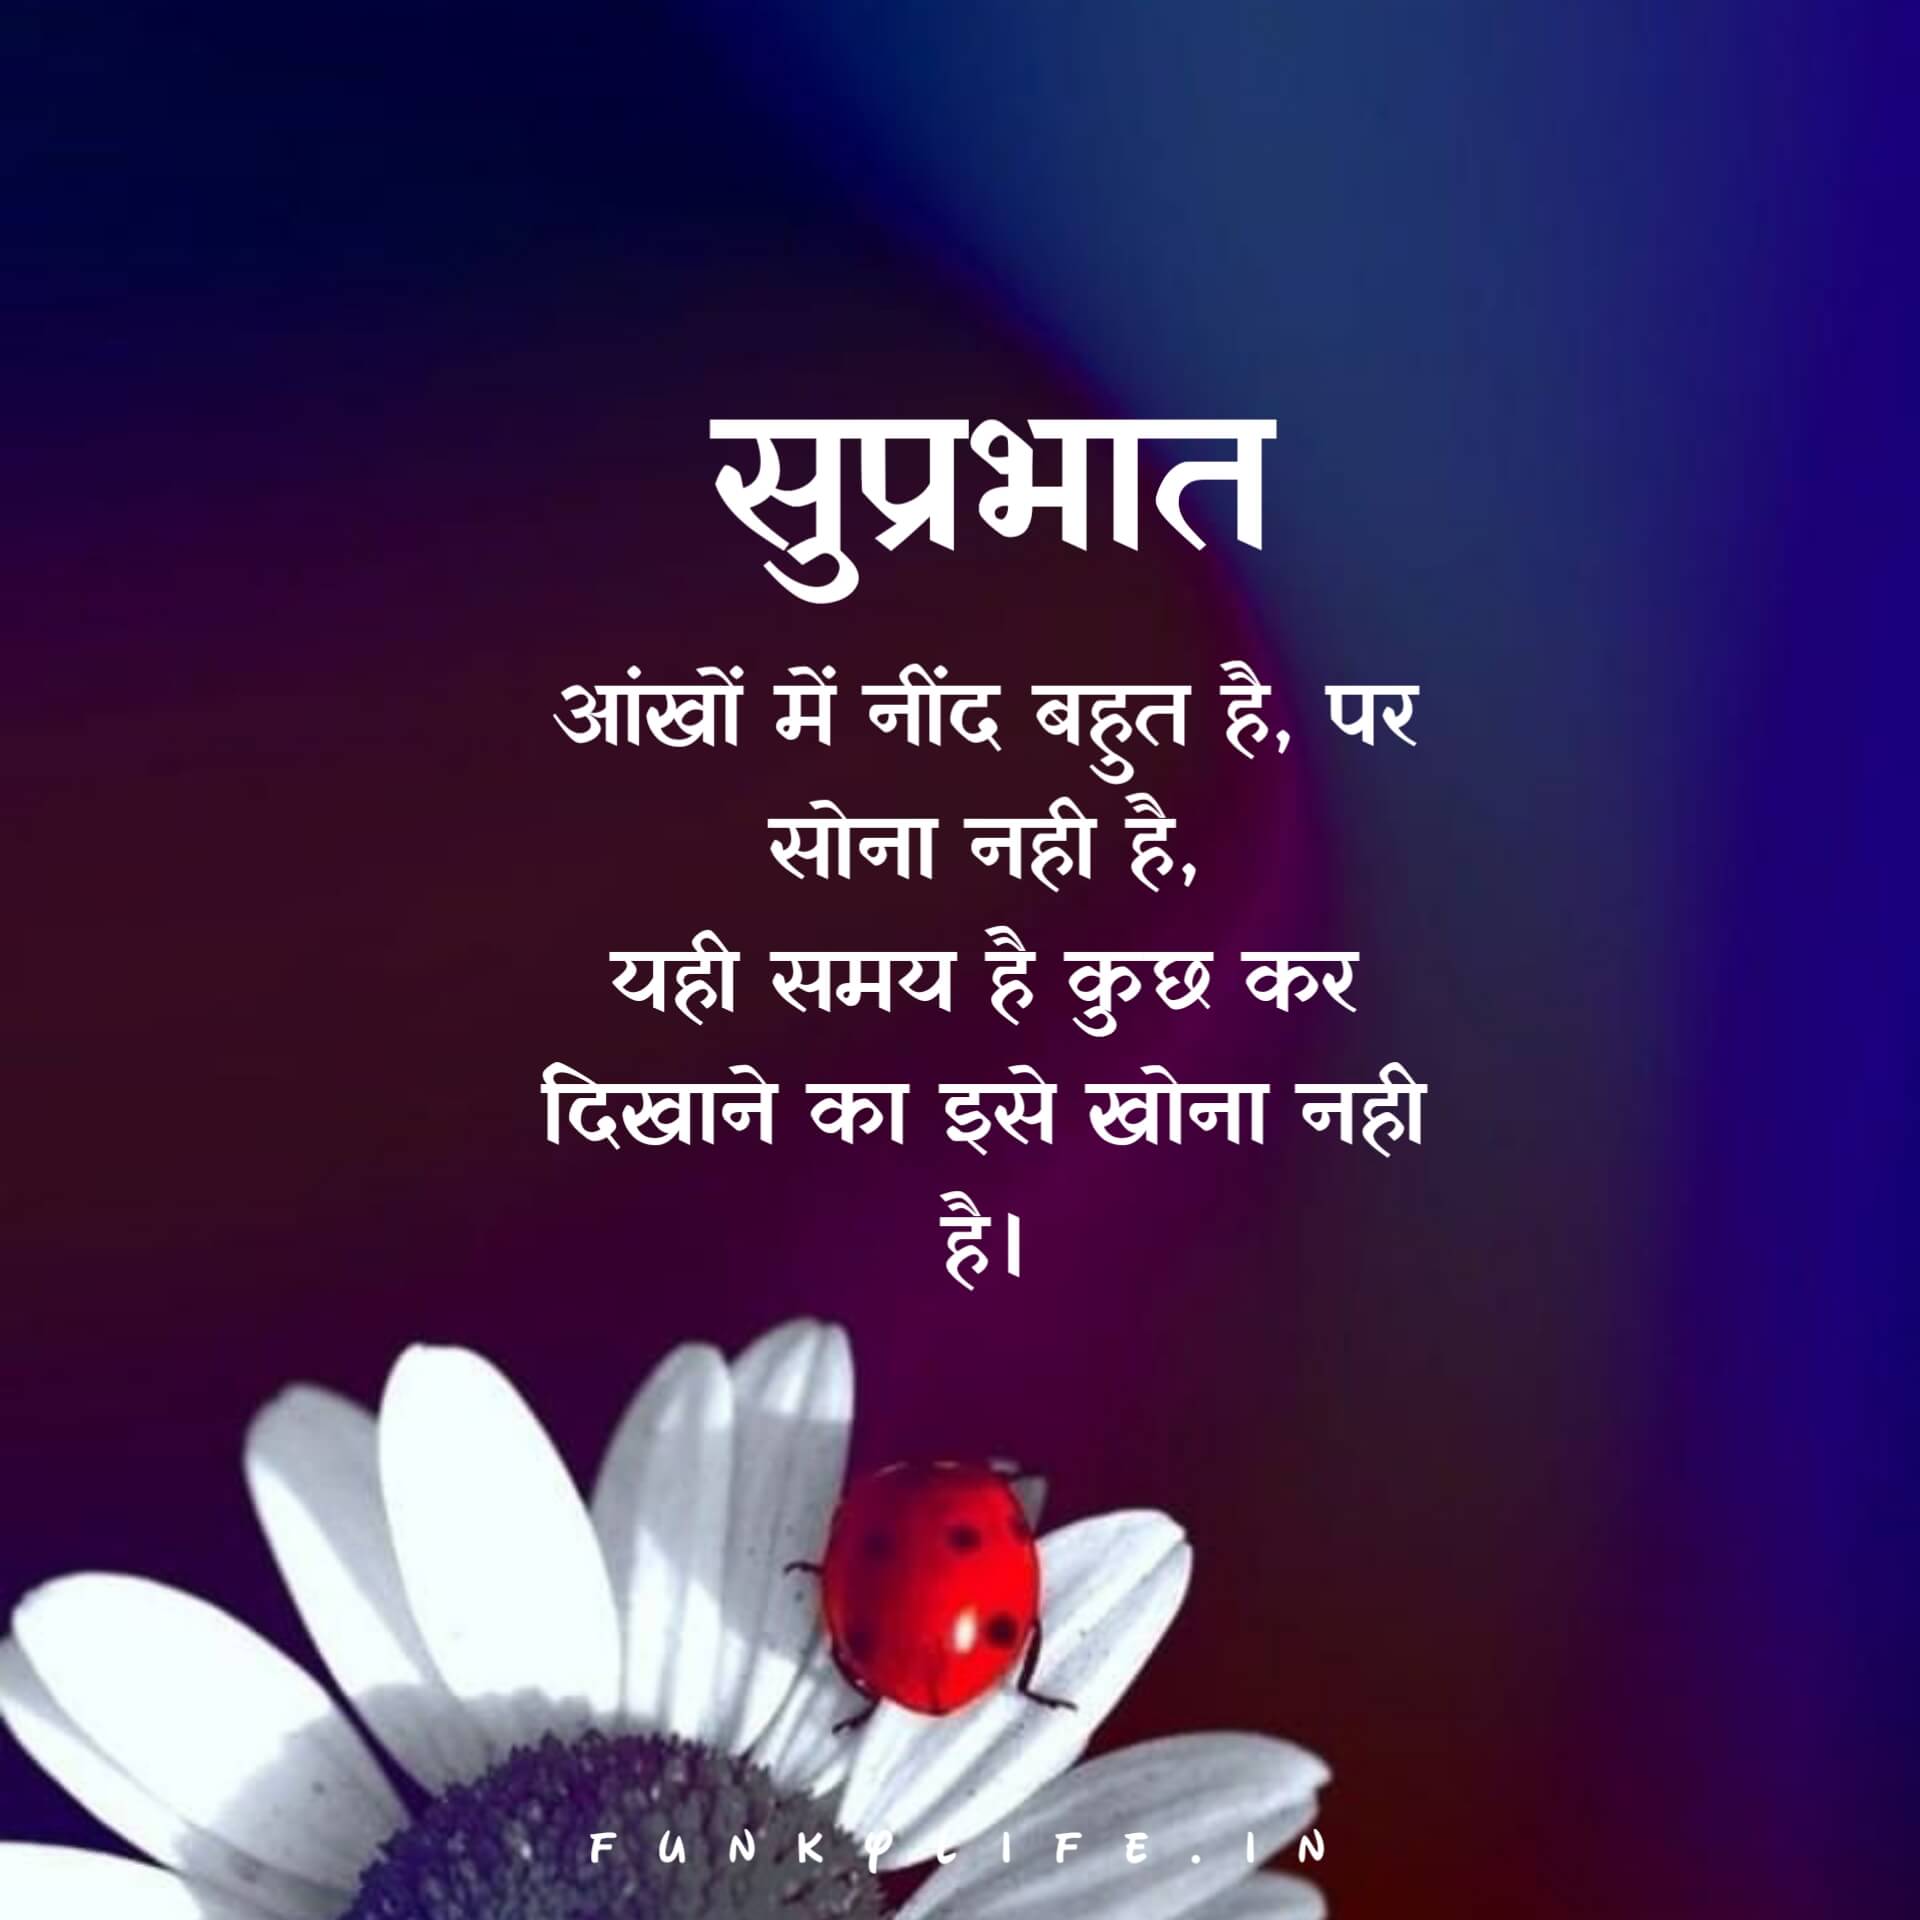 Good Morning Quotes in Hindi with Images